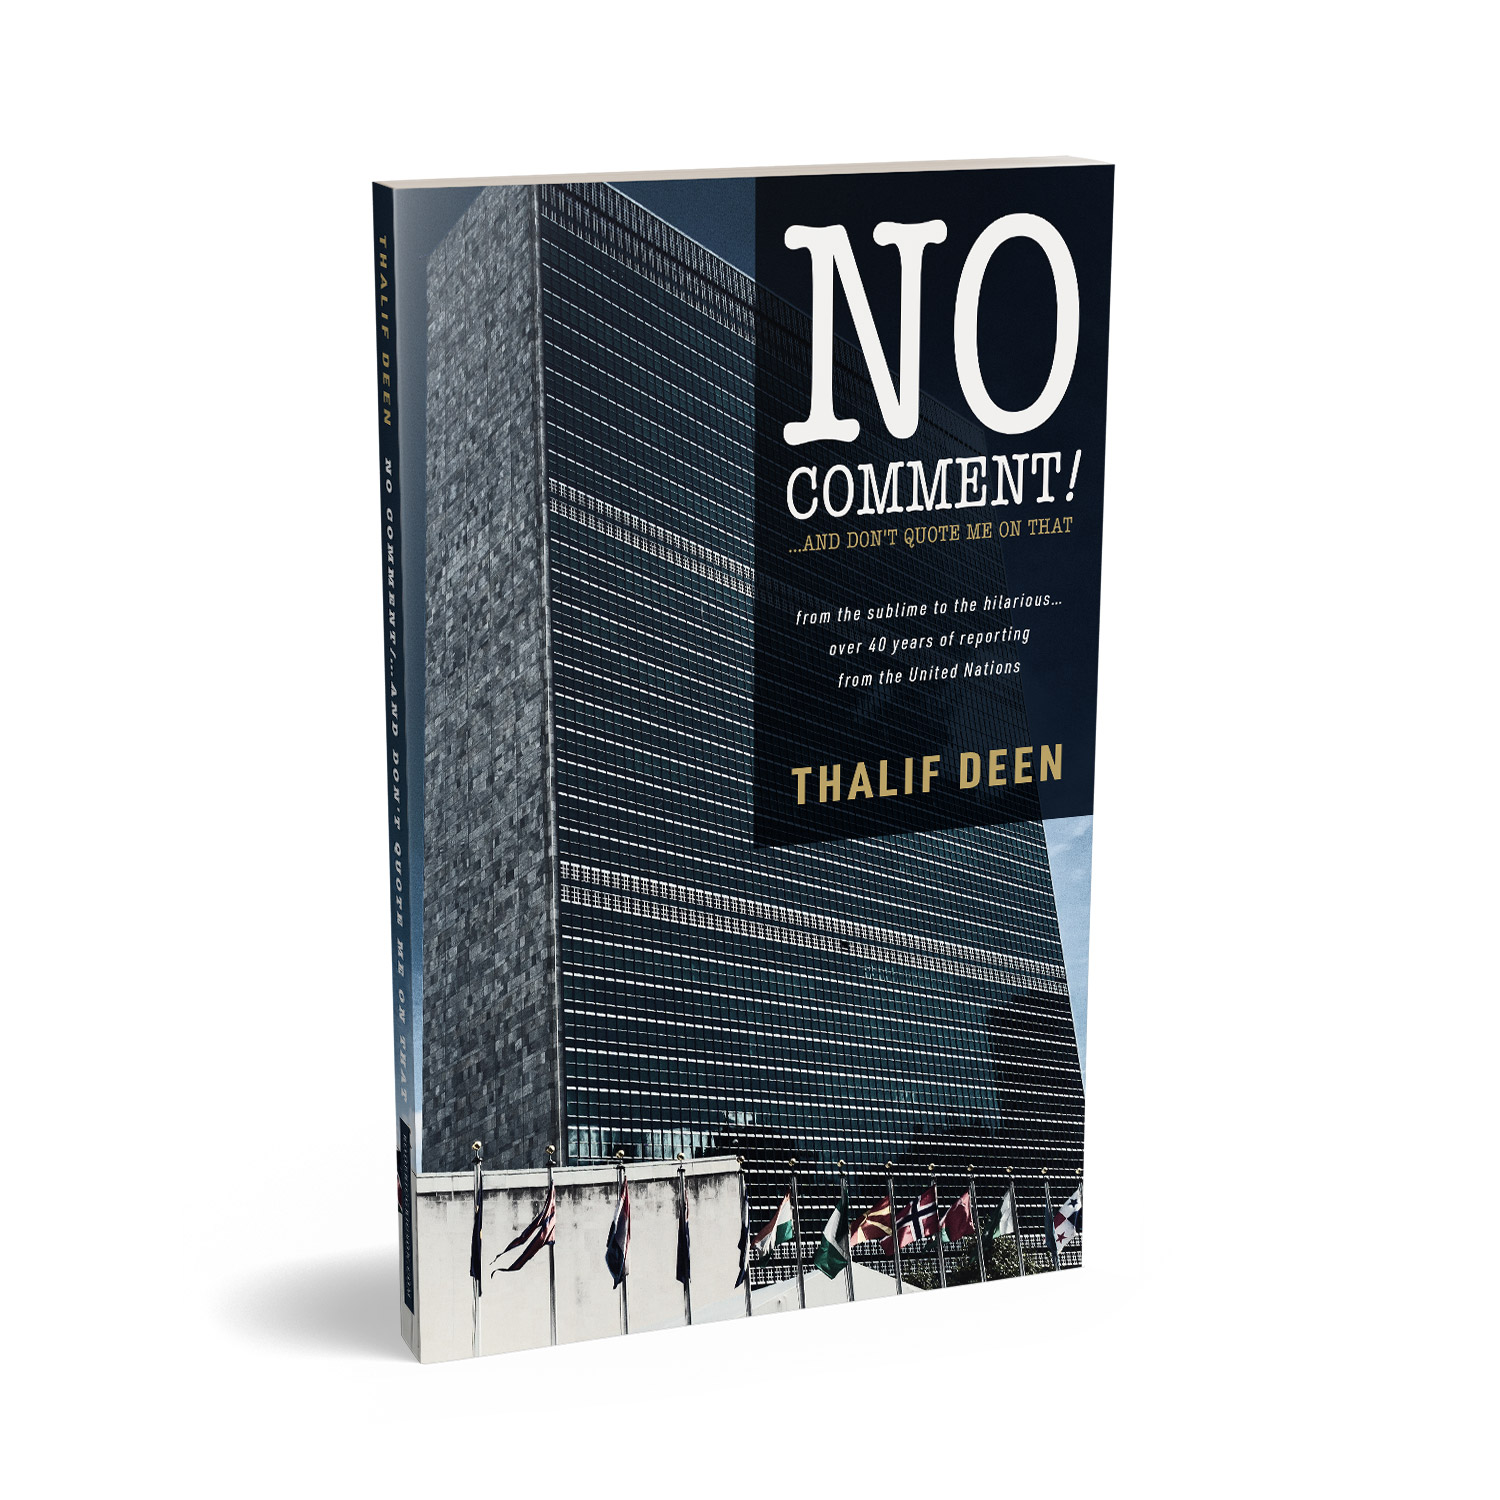 'No Comment!' is a humourous fly-on-the-wall memoir of life at the UN by senior journalist Thalif Deen. The book cover design and interior formatting are by Mark Thomas. To learn more about what Mark could do for your book, please visit coverness.com.